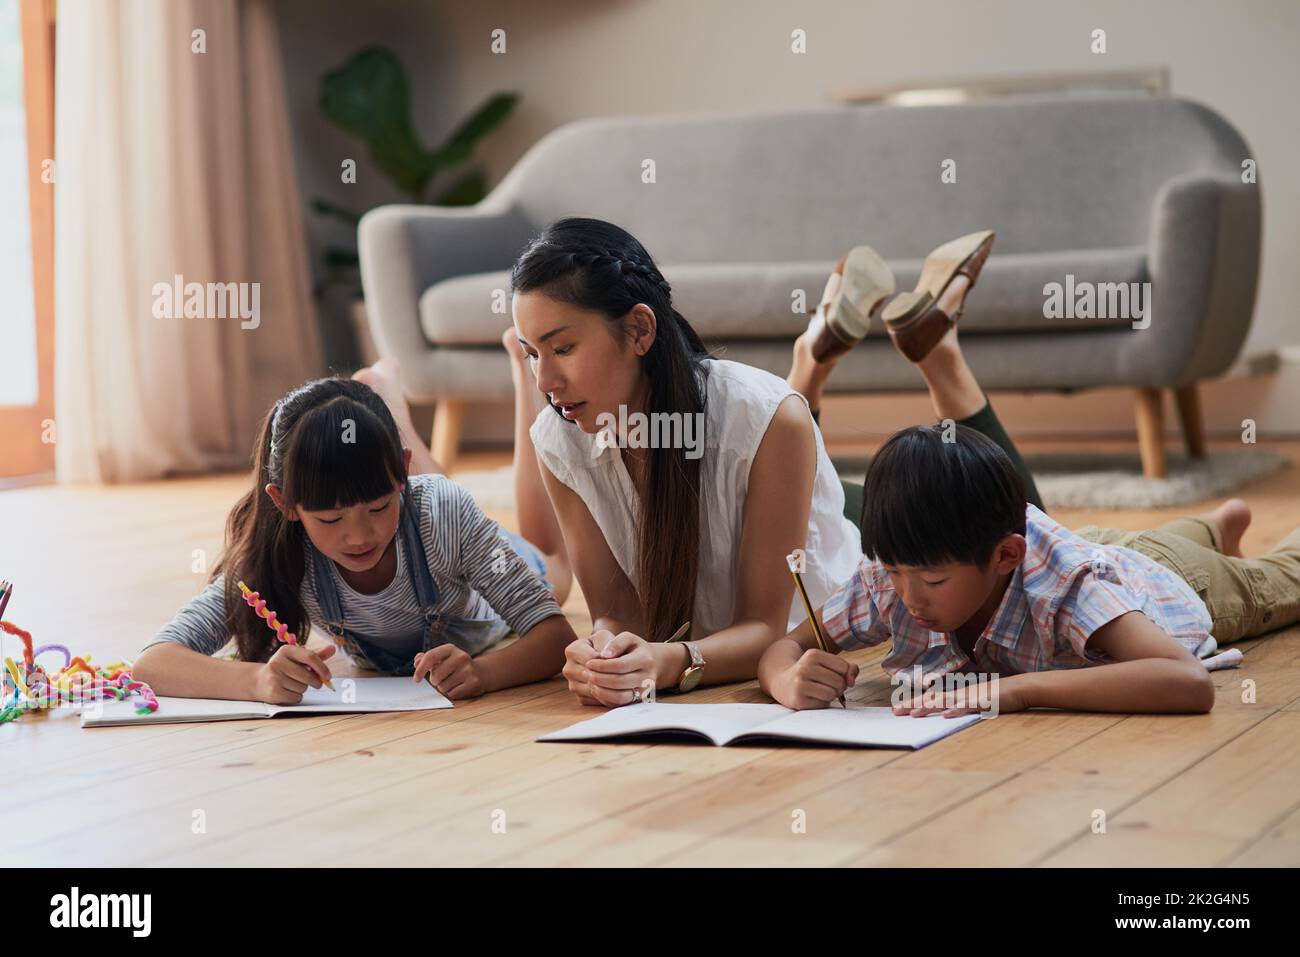 Mom makes sure that the kids do homework. Shot of a cheerful mother and her two children doing homework together while lying on the floor at home during the day. Stock Photo